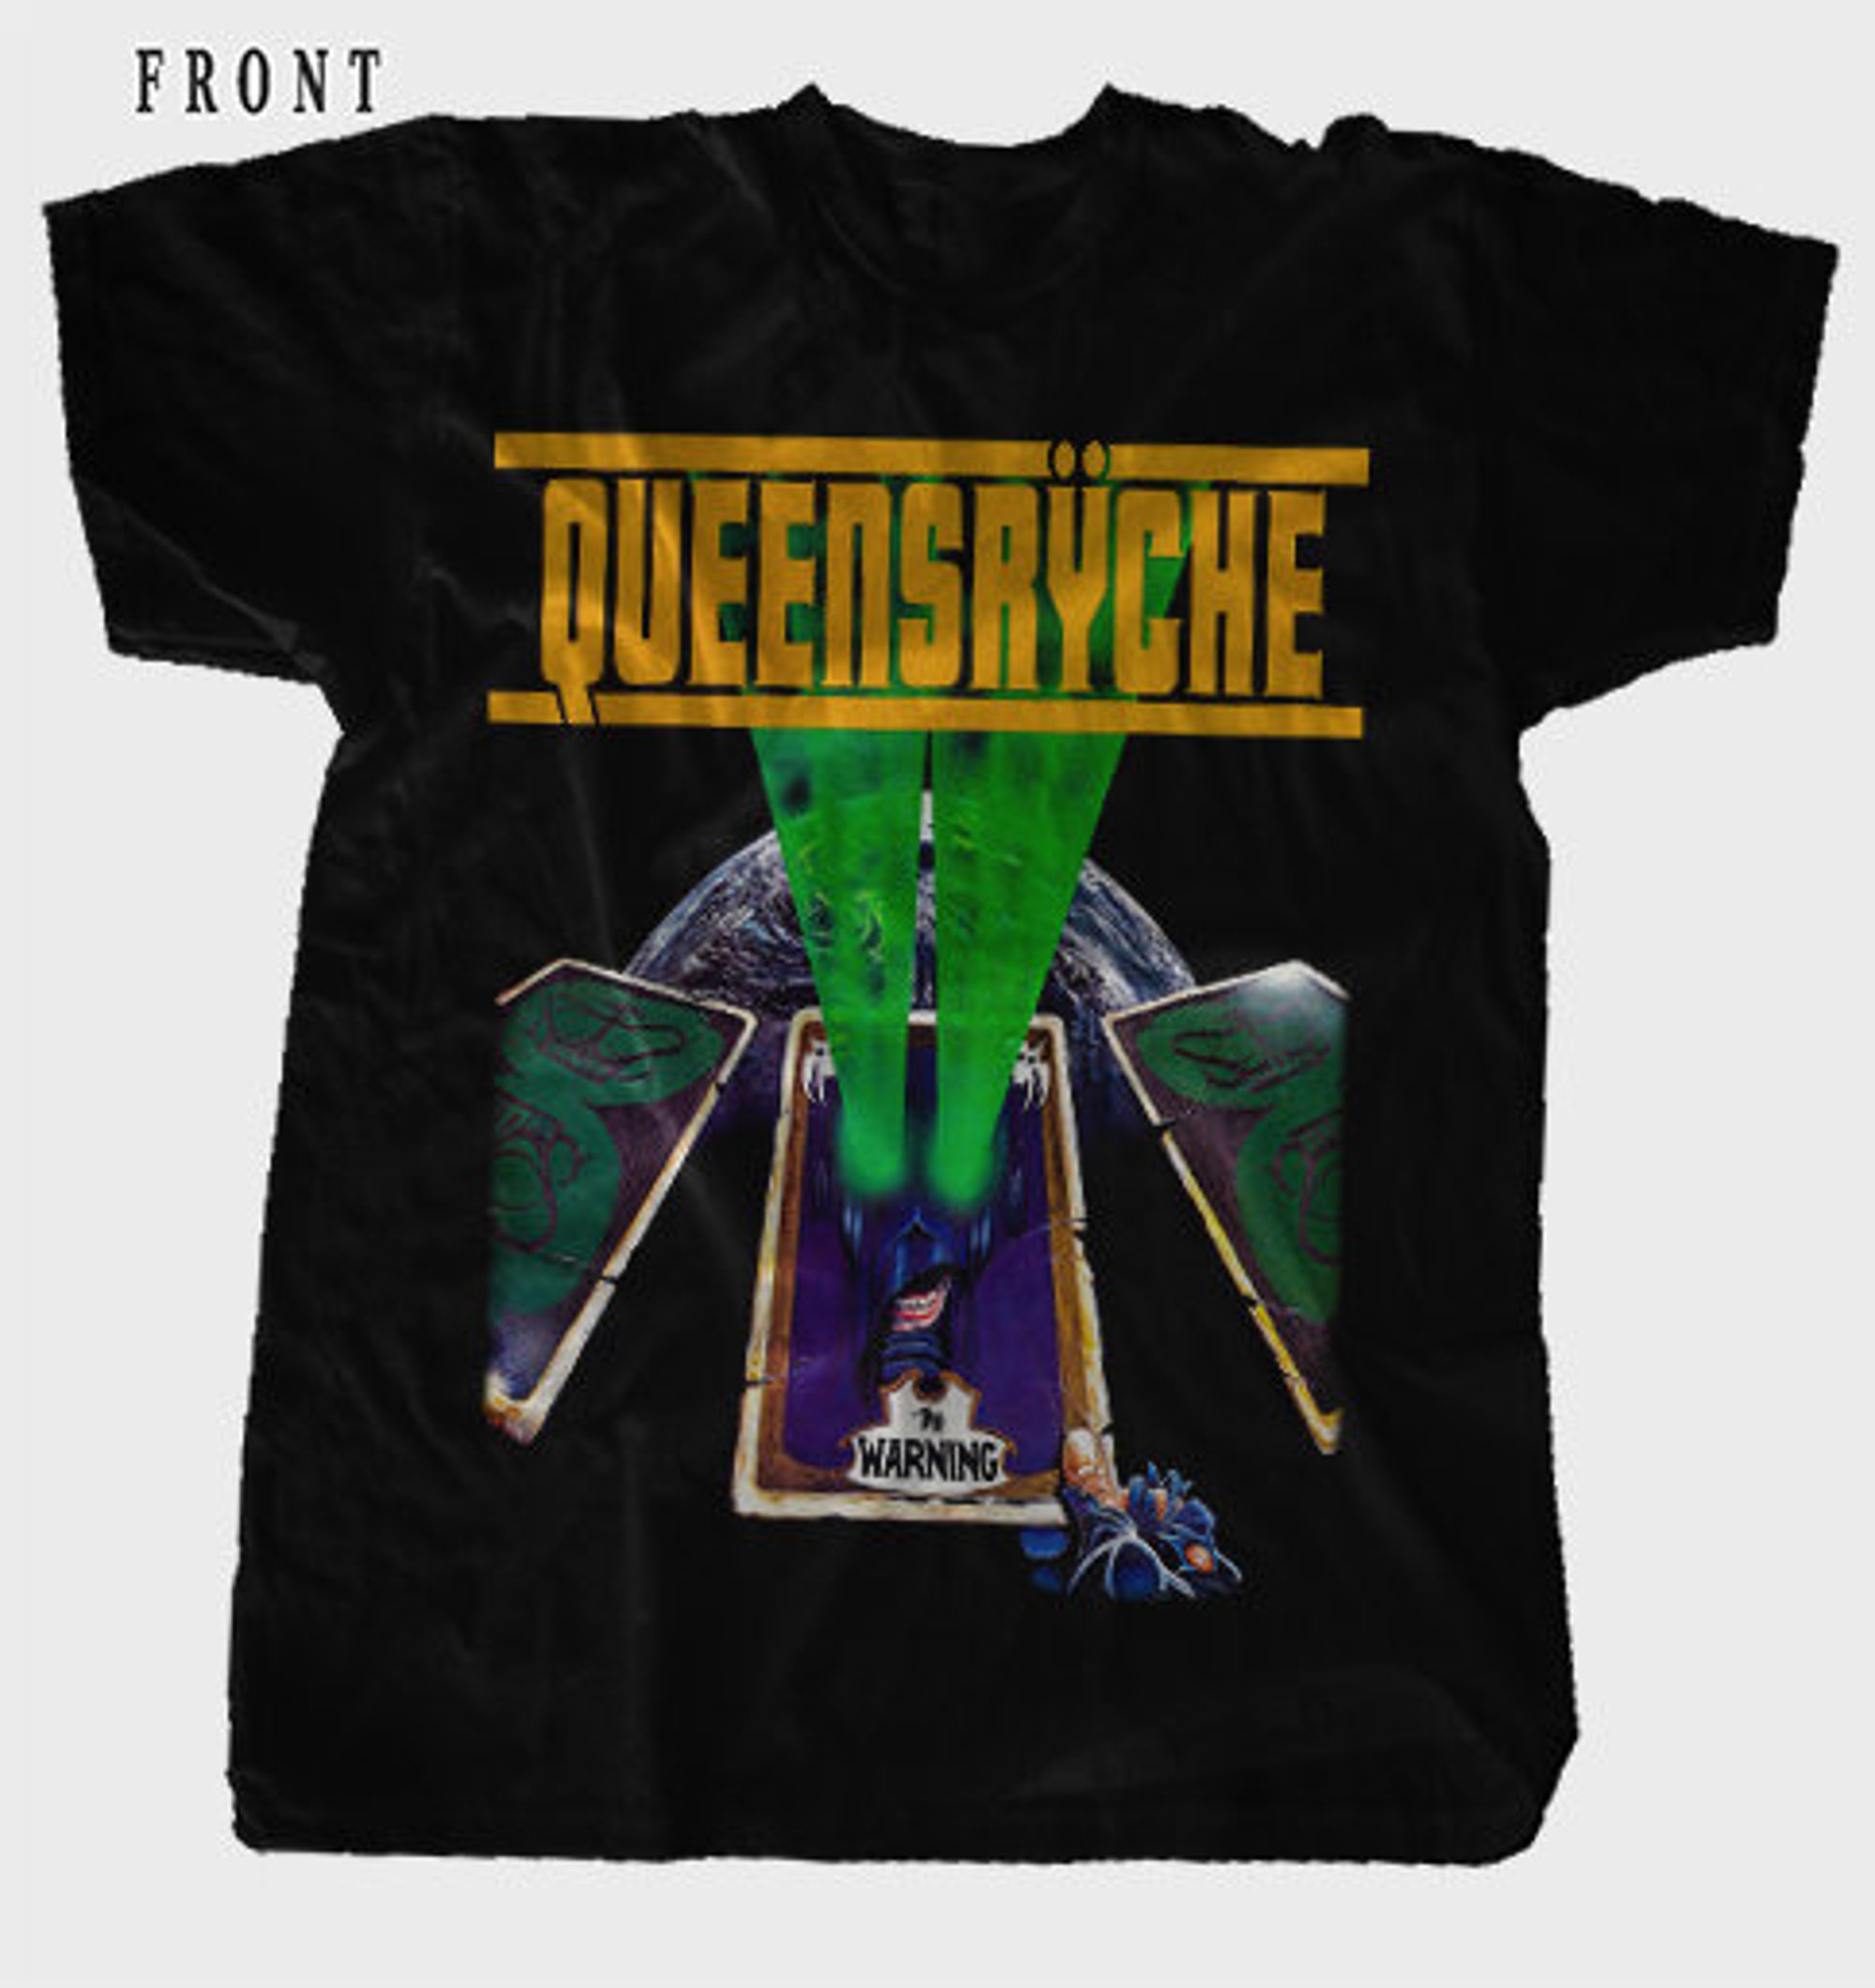 QUEENSRYCHE - The Warning t-shirt